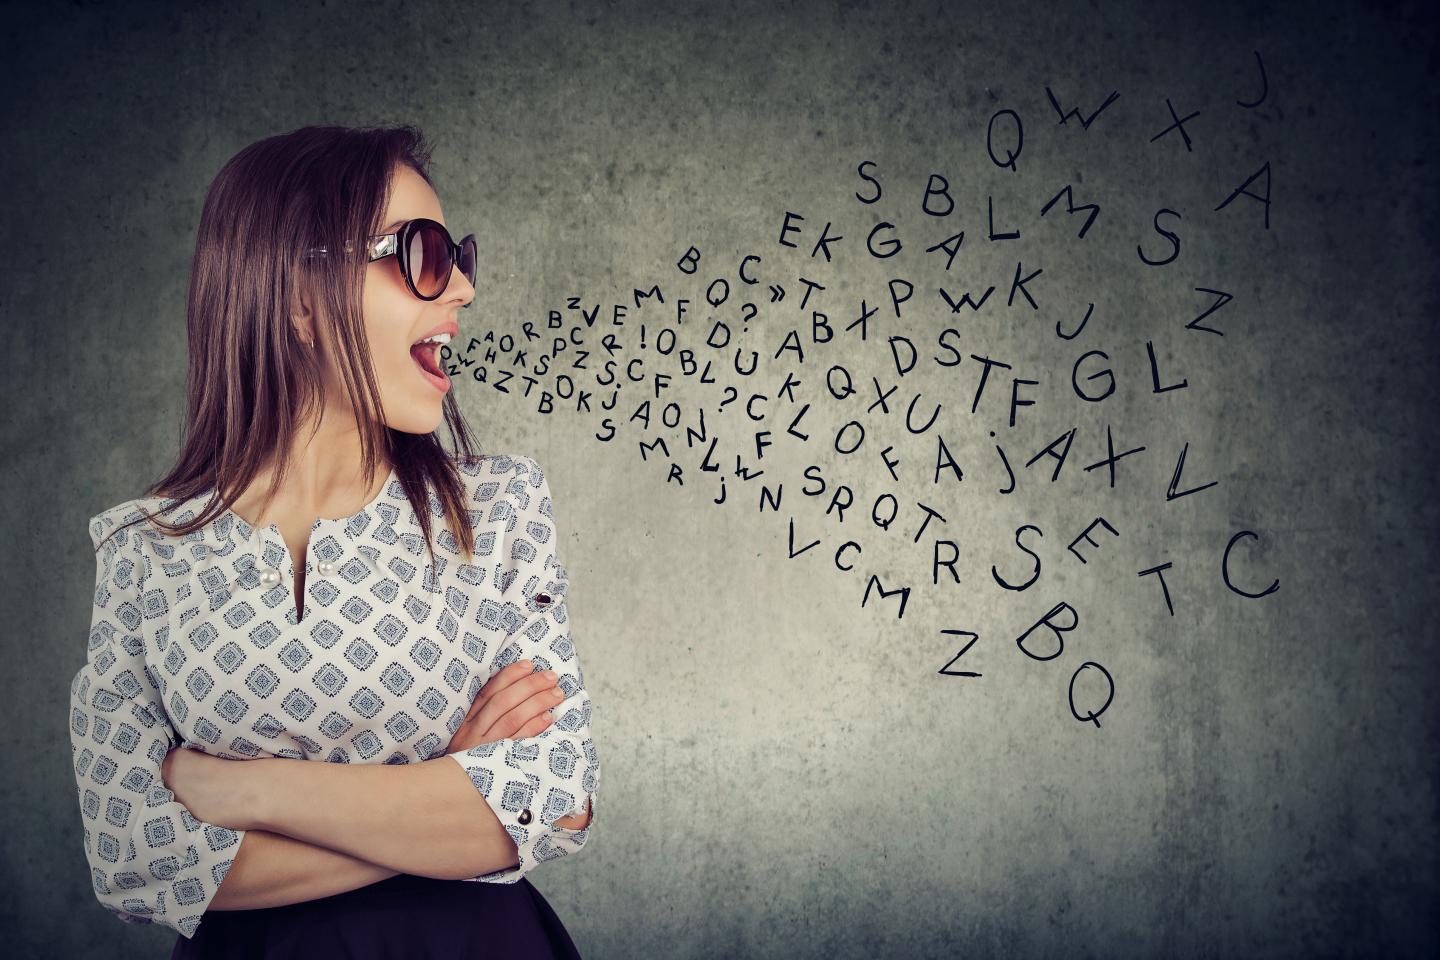 Researchers share database for studying individual differences in language skills